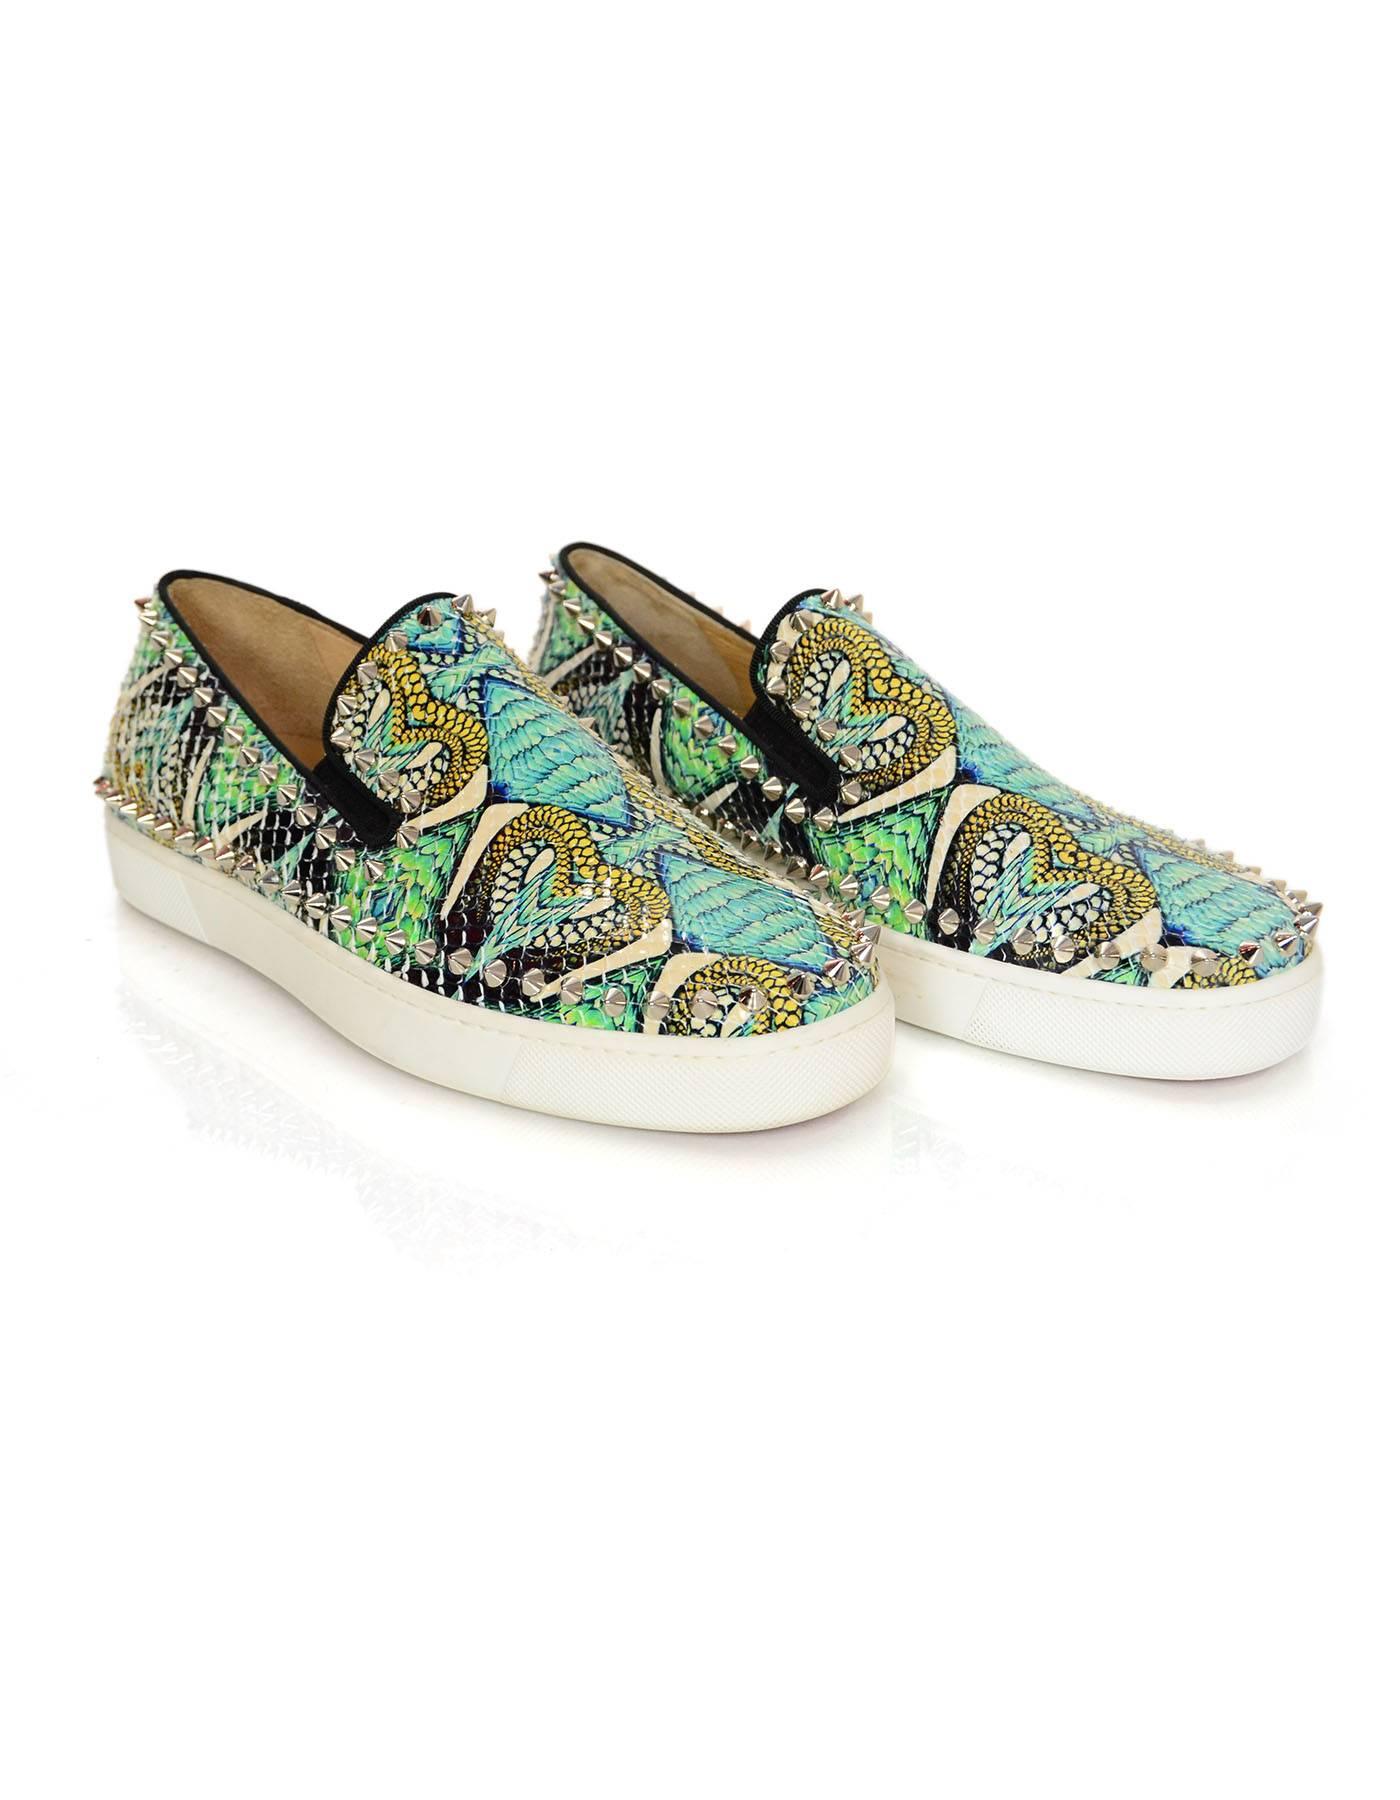 Christian Louboutin Blue and Green Printed Python Stud Sneakers Sz 38 In Excellent Condition In New York, NY